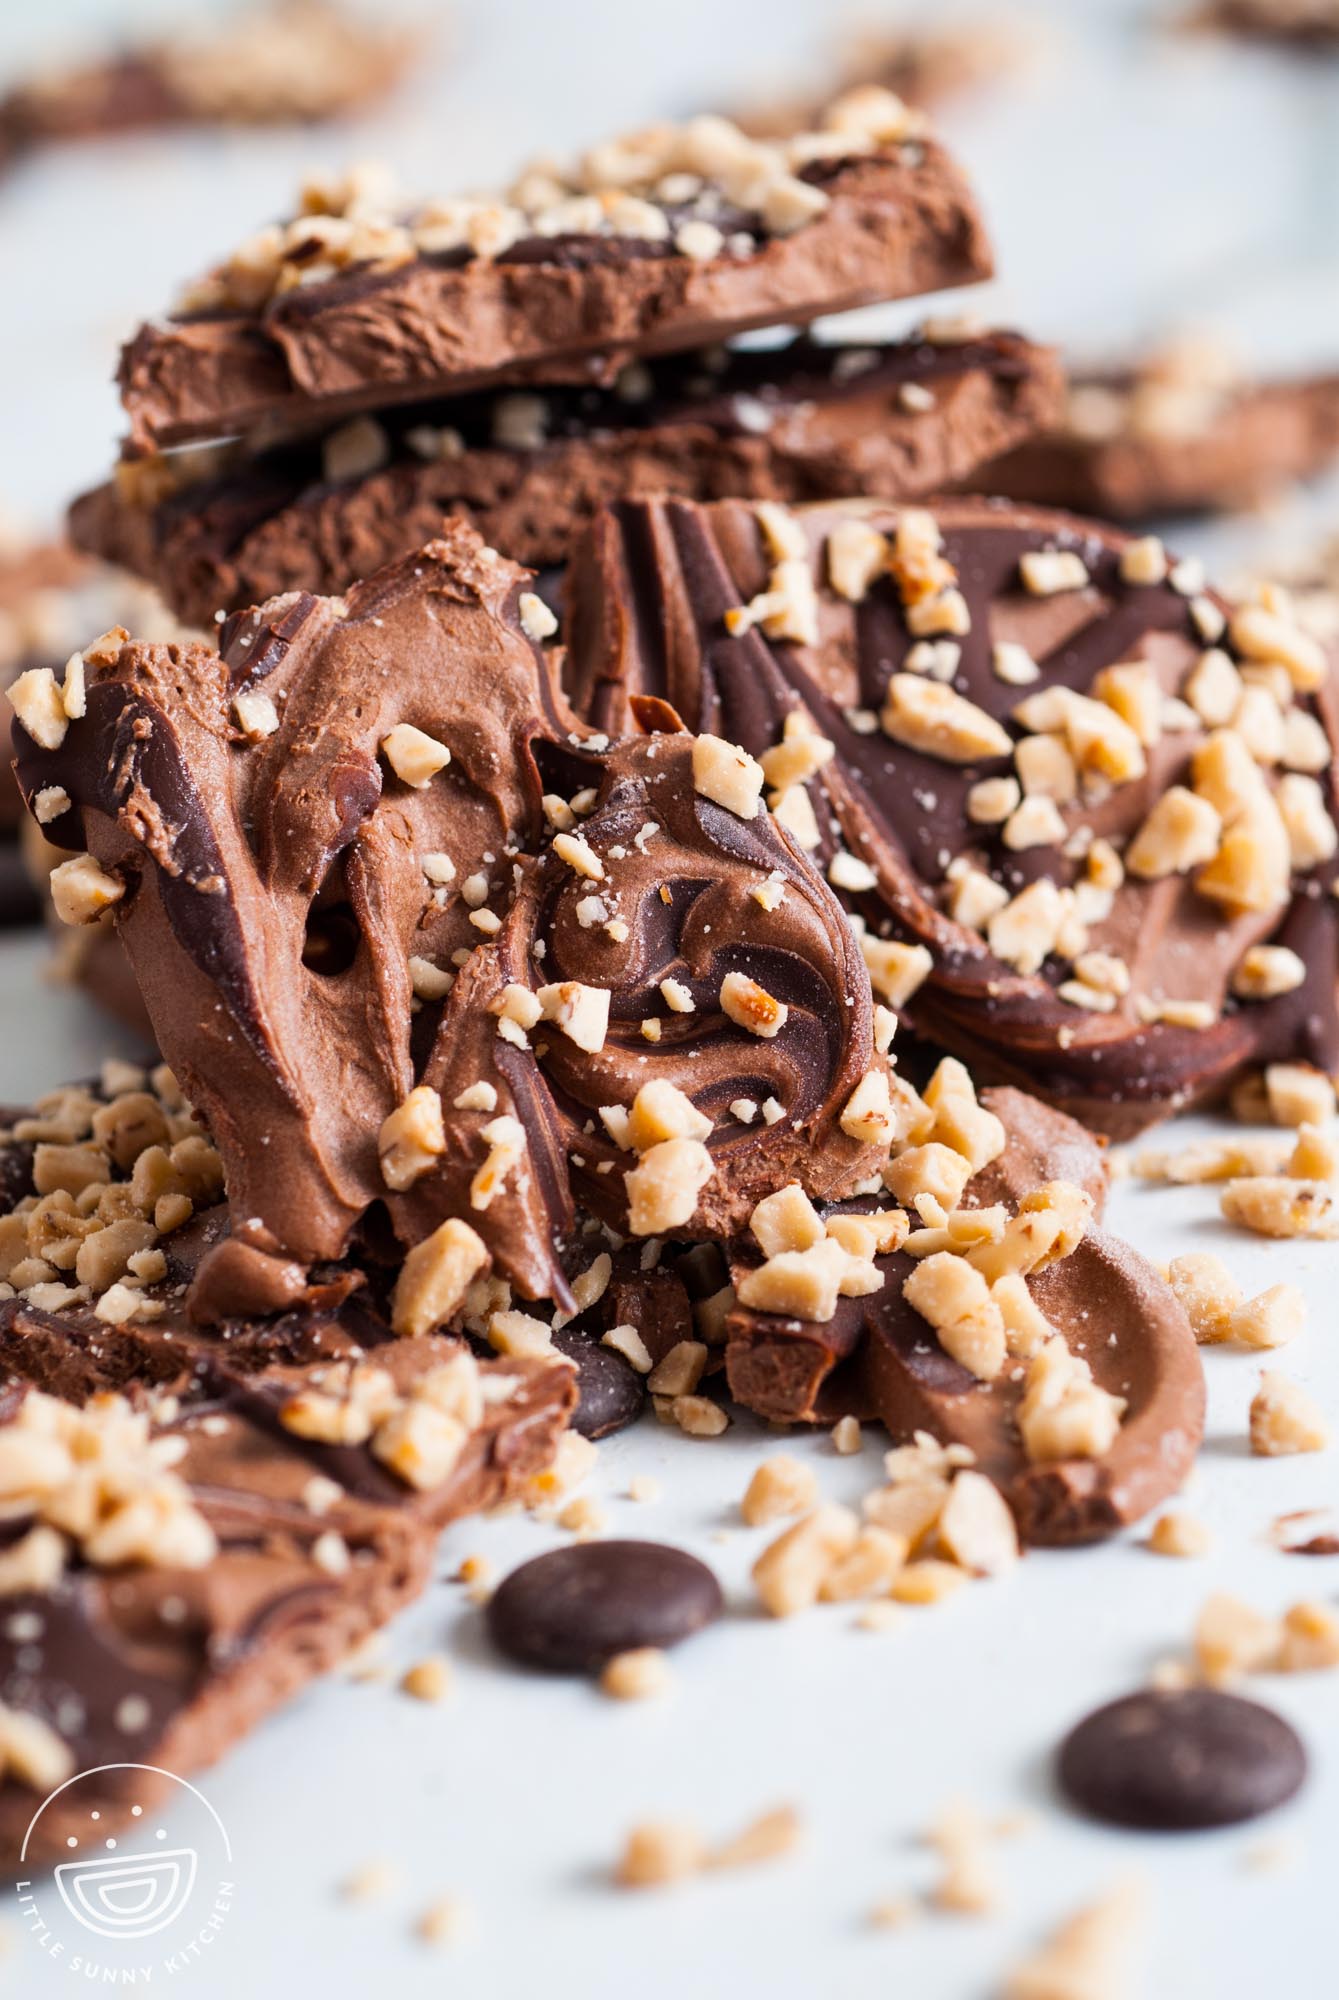 Pieces of frozen chocolate yogurt bark on a white surface, topped with swirled chocolate and chopped toffee bits.